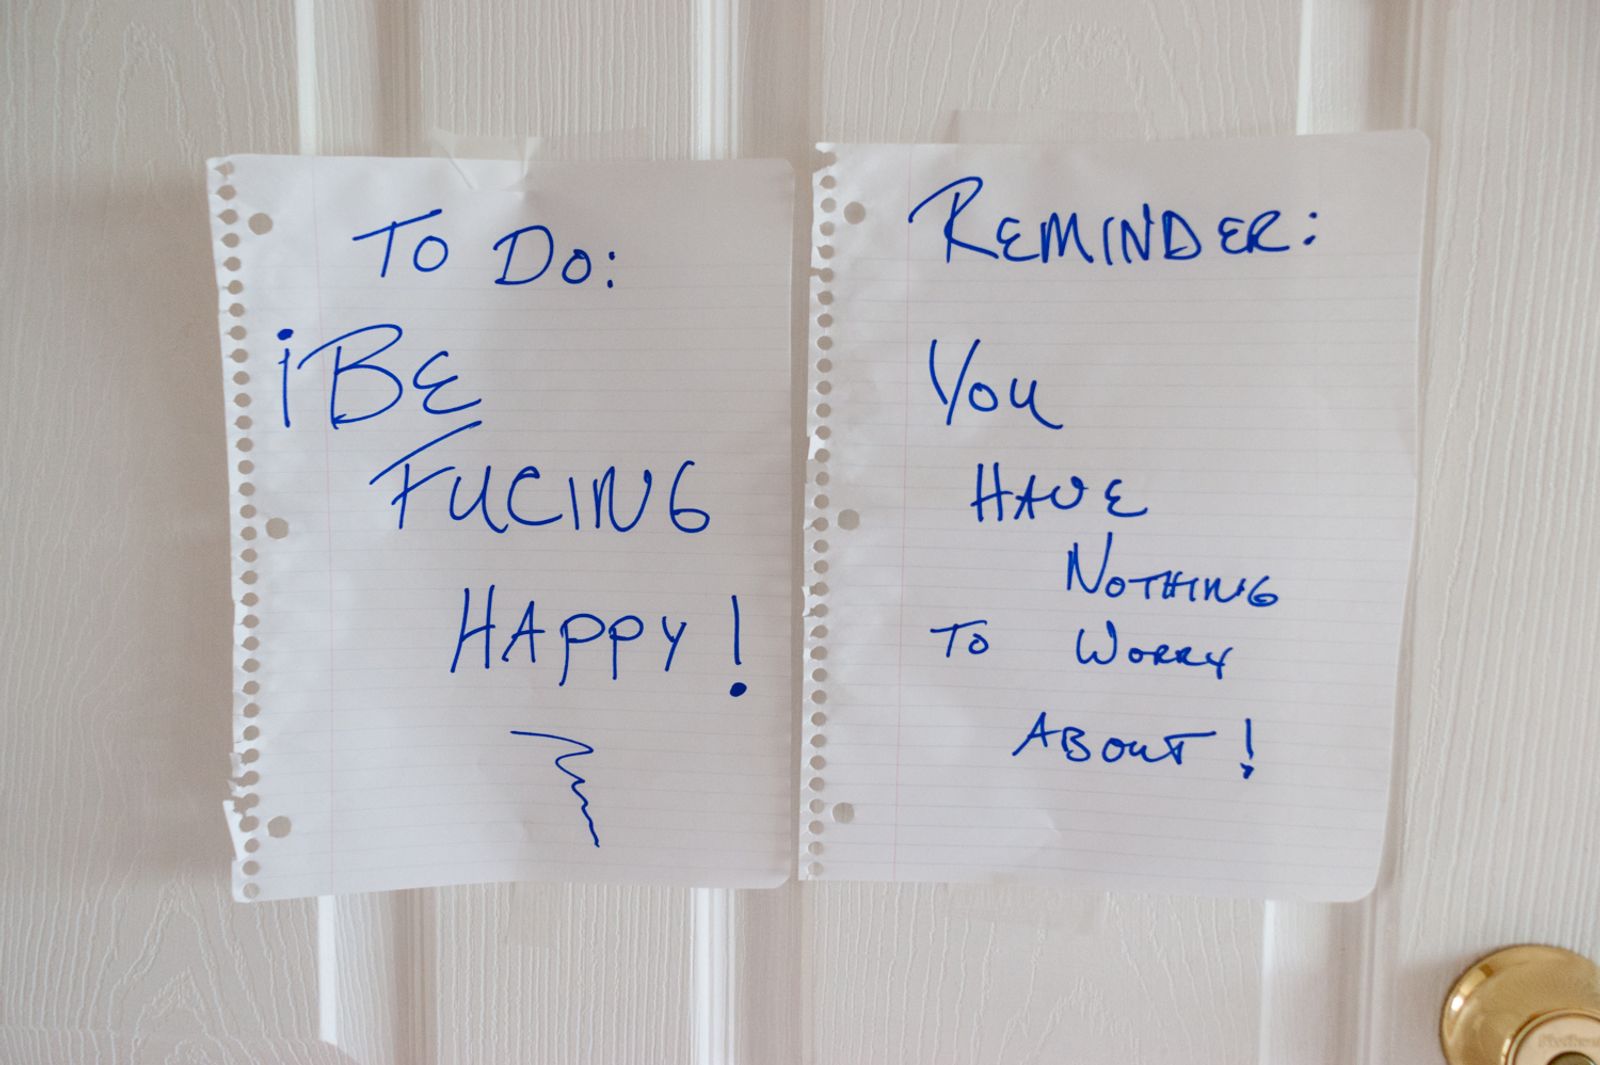 © Melissa Spitz - Note from Adam to Mom, 2012